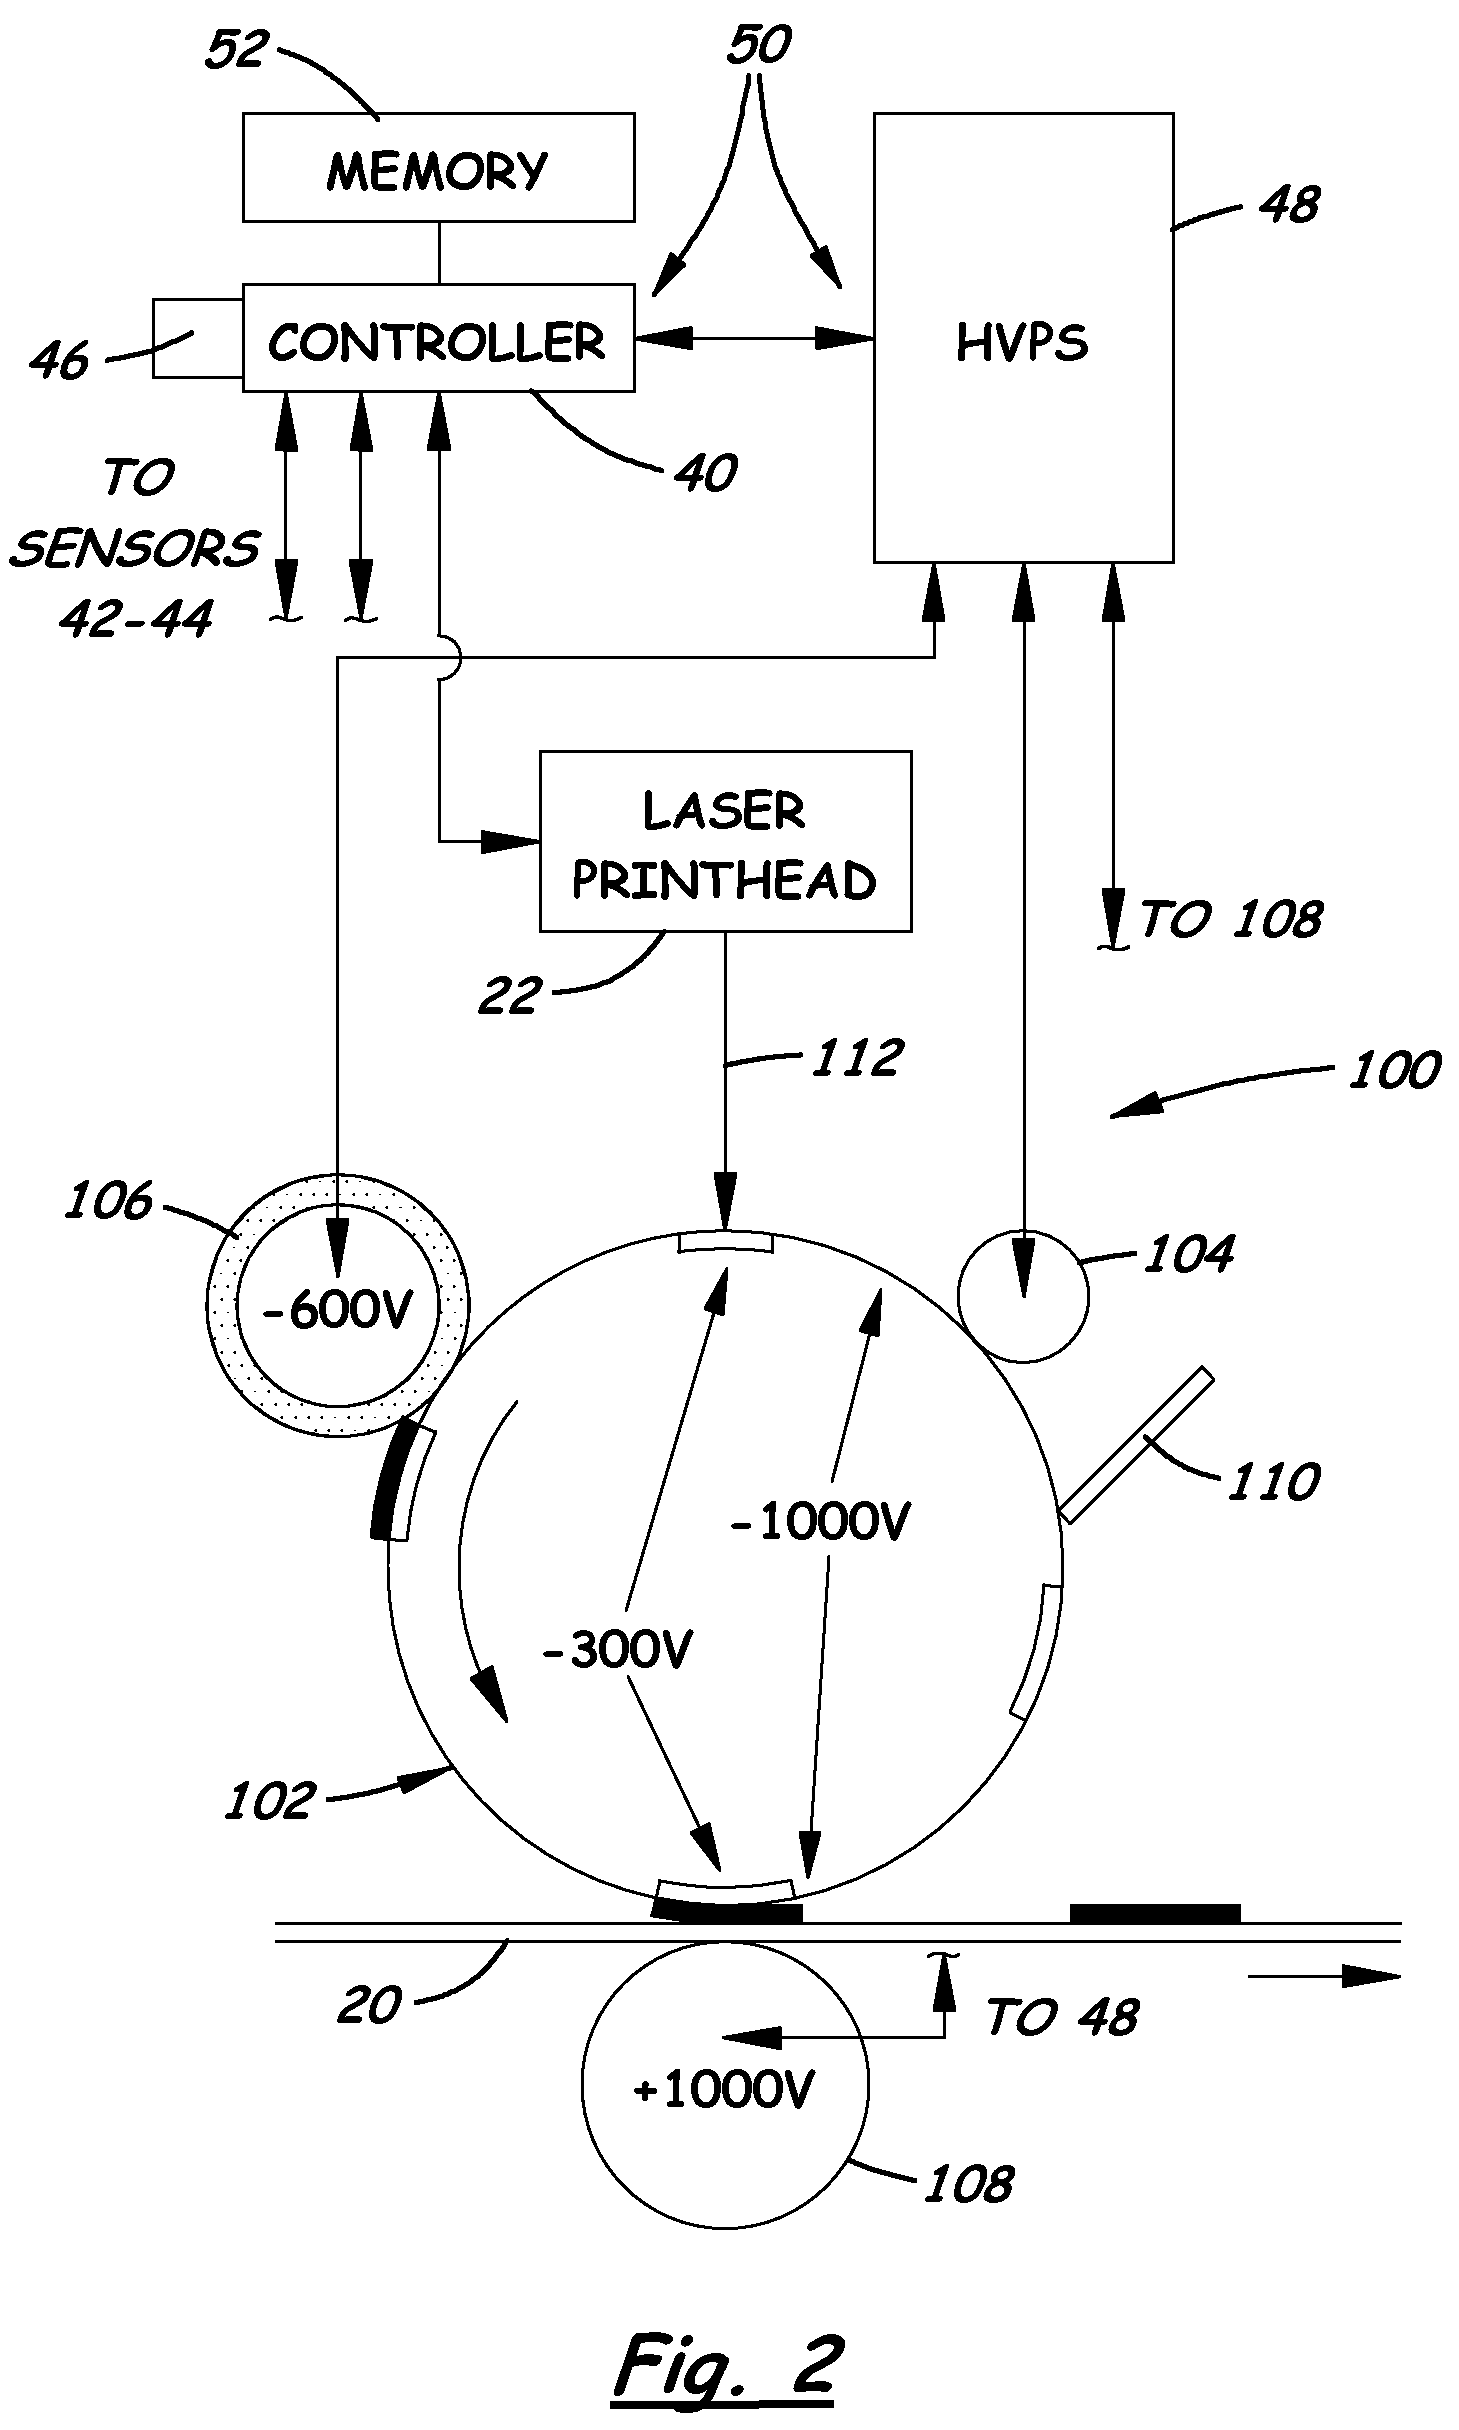 System and Method for Adjusting Selected Operating Parameters of Image Forming Device Based on Selected Environmental Conditions to Improve Color Registration